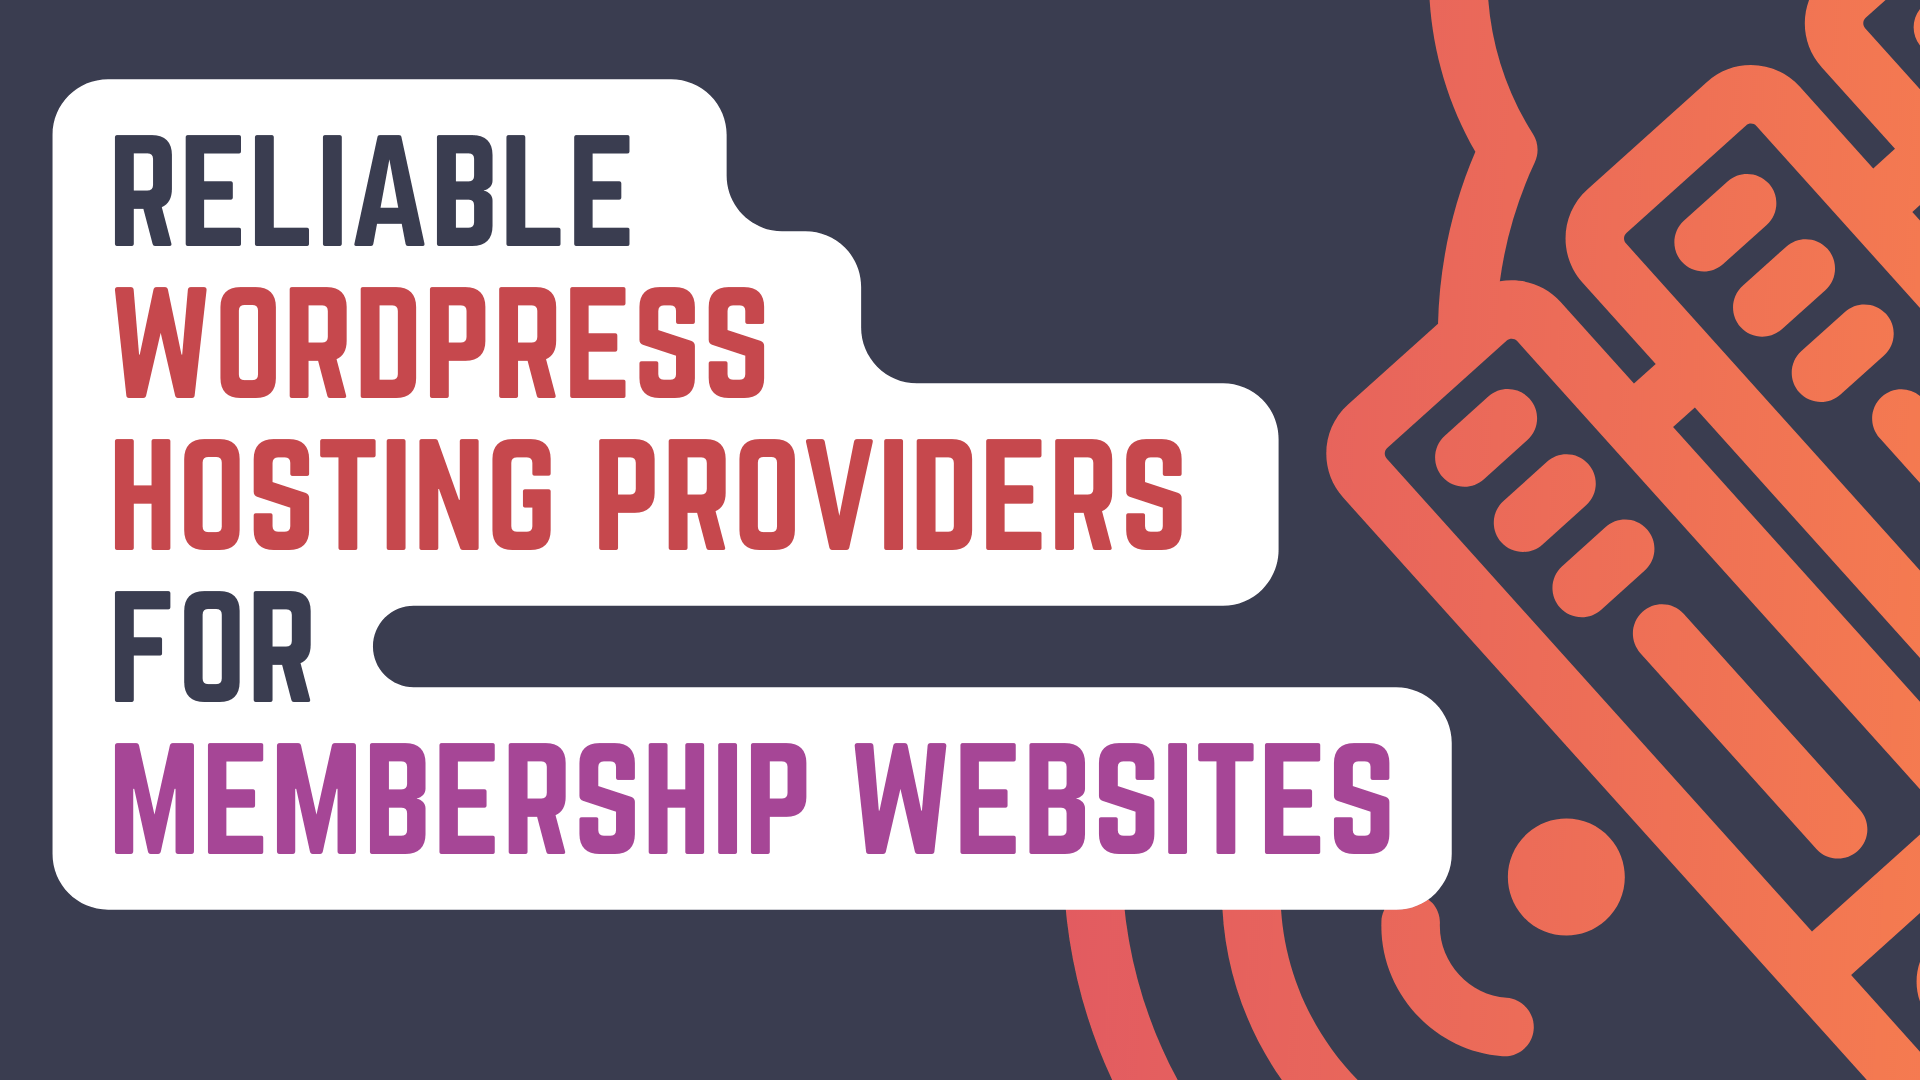 Reliable WordPress Hosting Providers For Membership Websites in 2022 | Featured Image | Best, Cheapest, Fastest | US, UK, India, Canada, Australia, South Africa, Germany, Denmark, Singapore, Mexico, Japan, EU